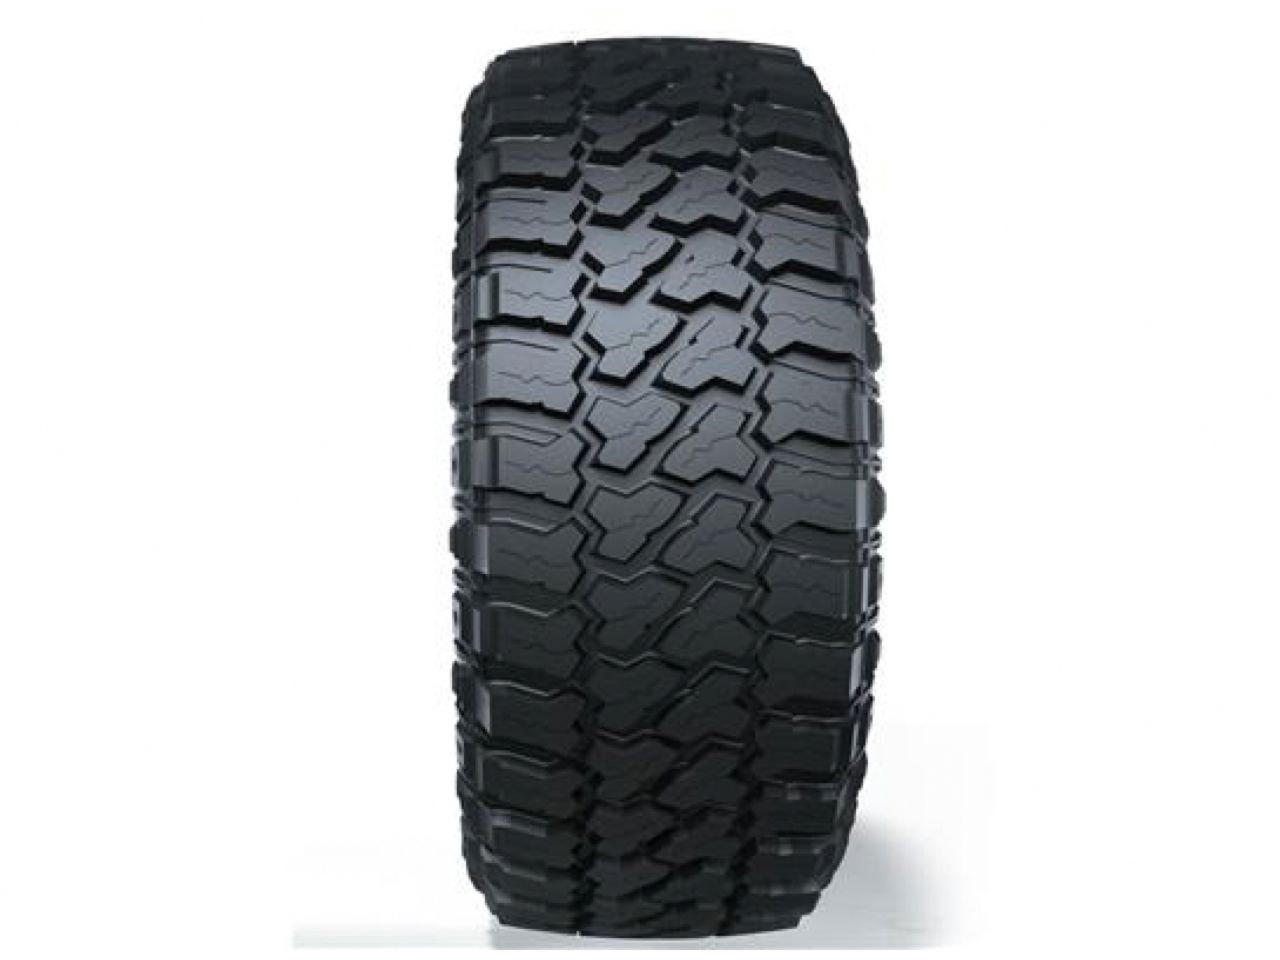 Fury Off Road 35x12.50R22 Tire, Country Hunter M/T